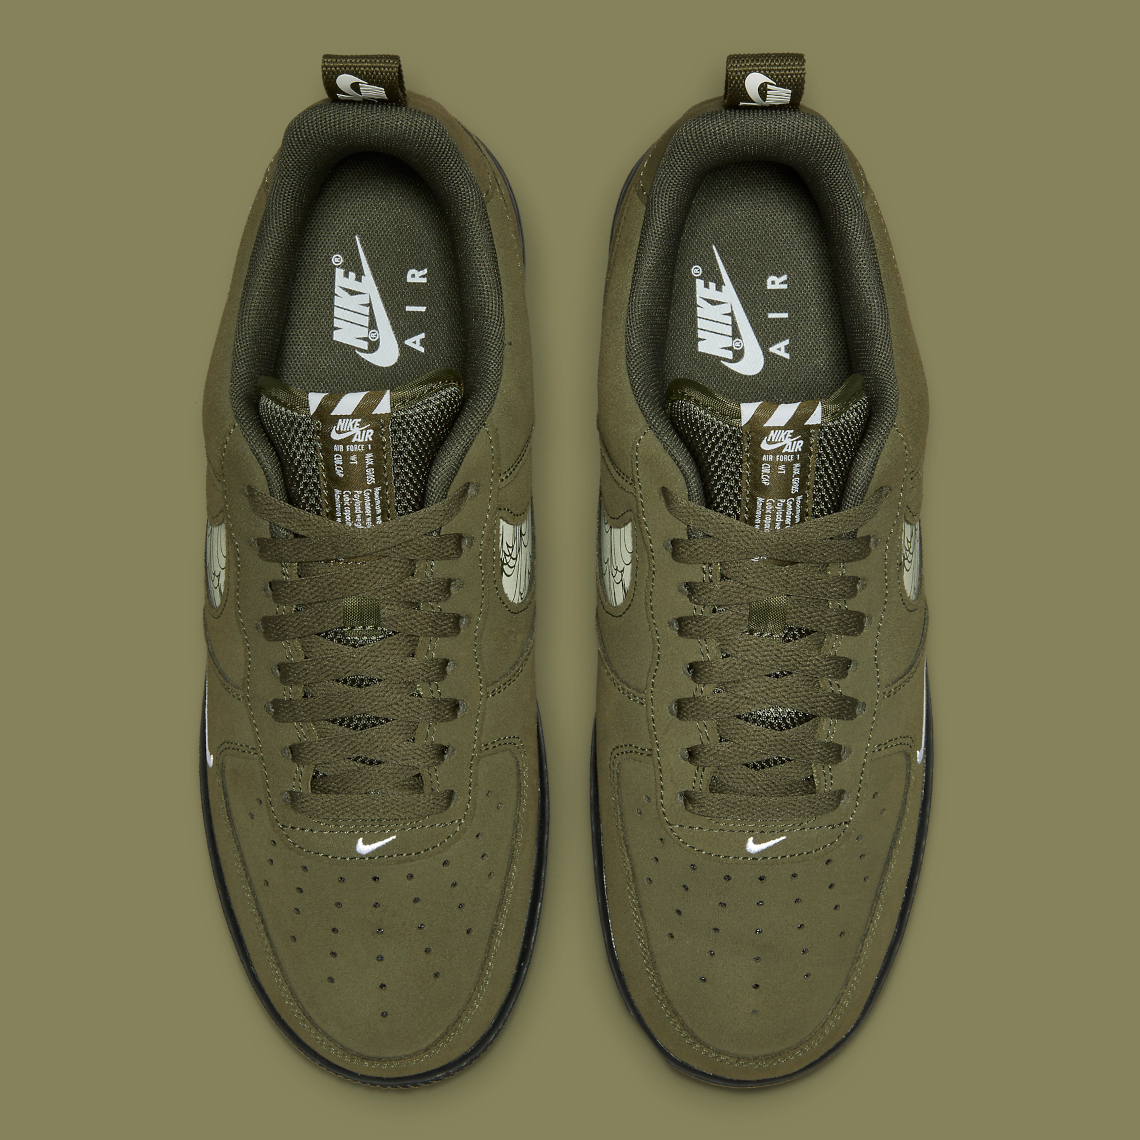 nike air force 1 olive green｜TikTok Search